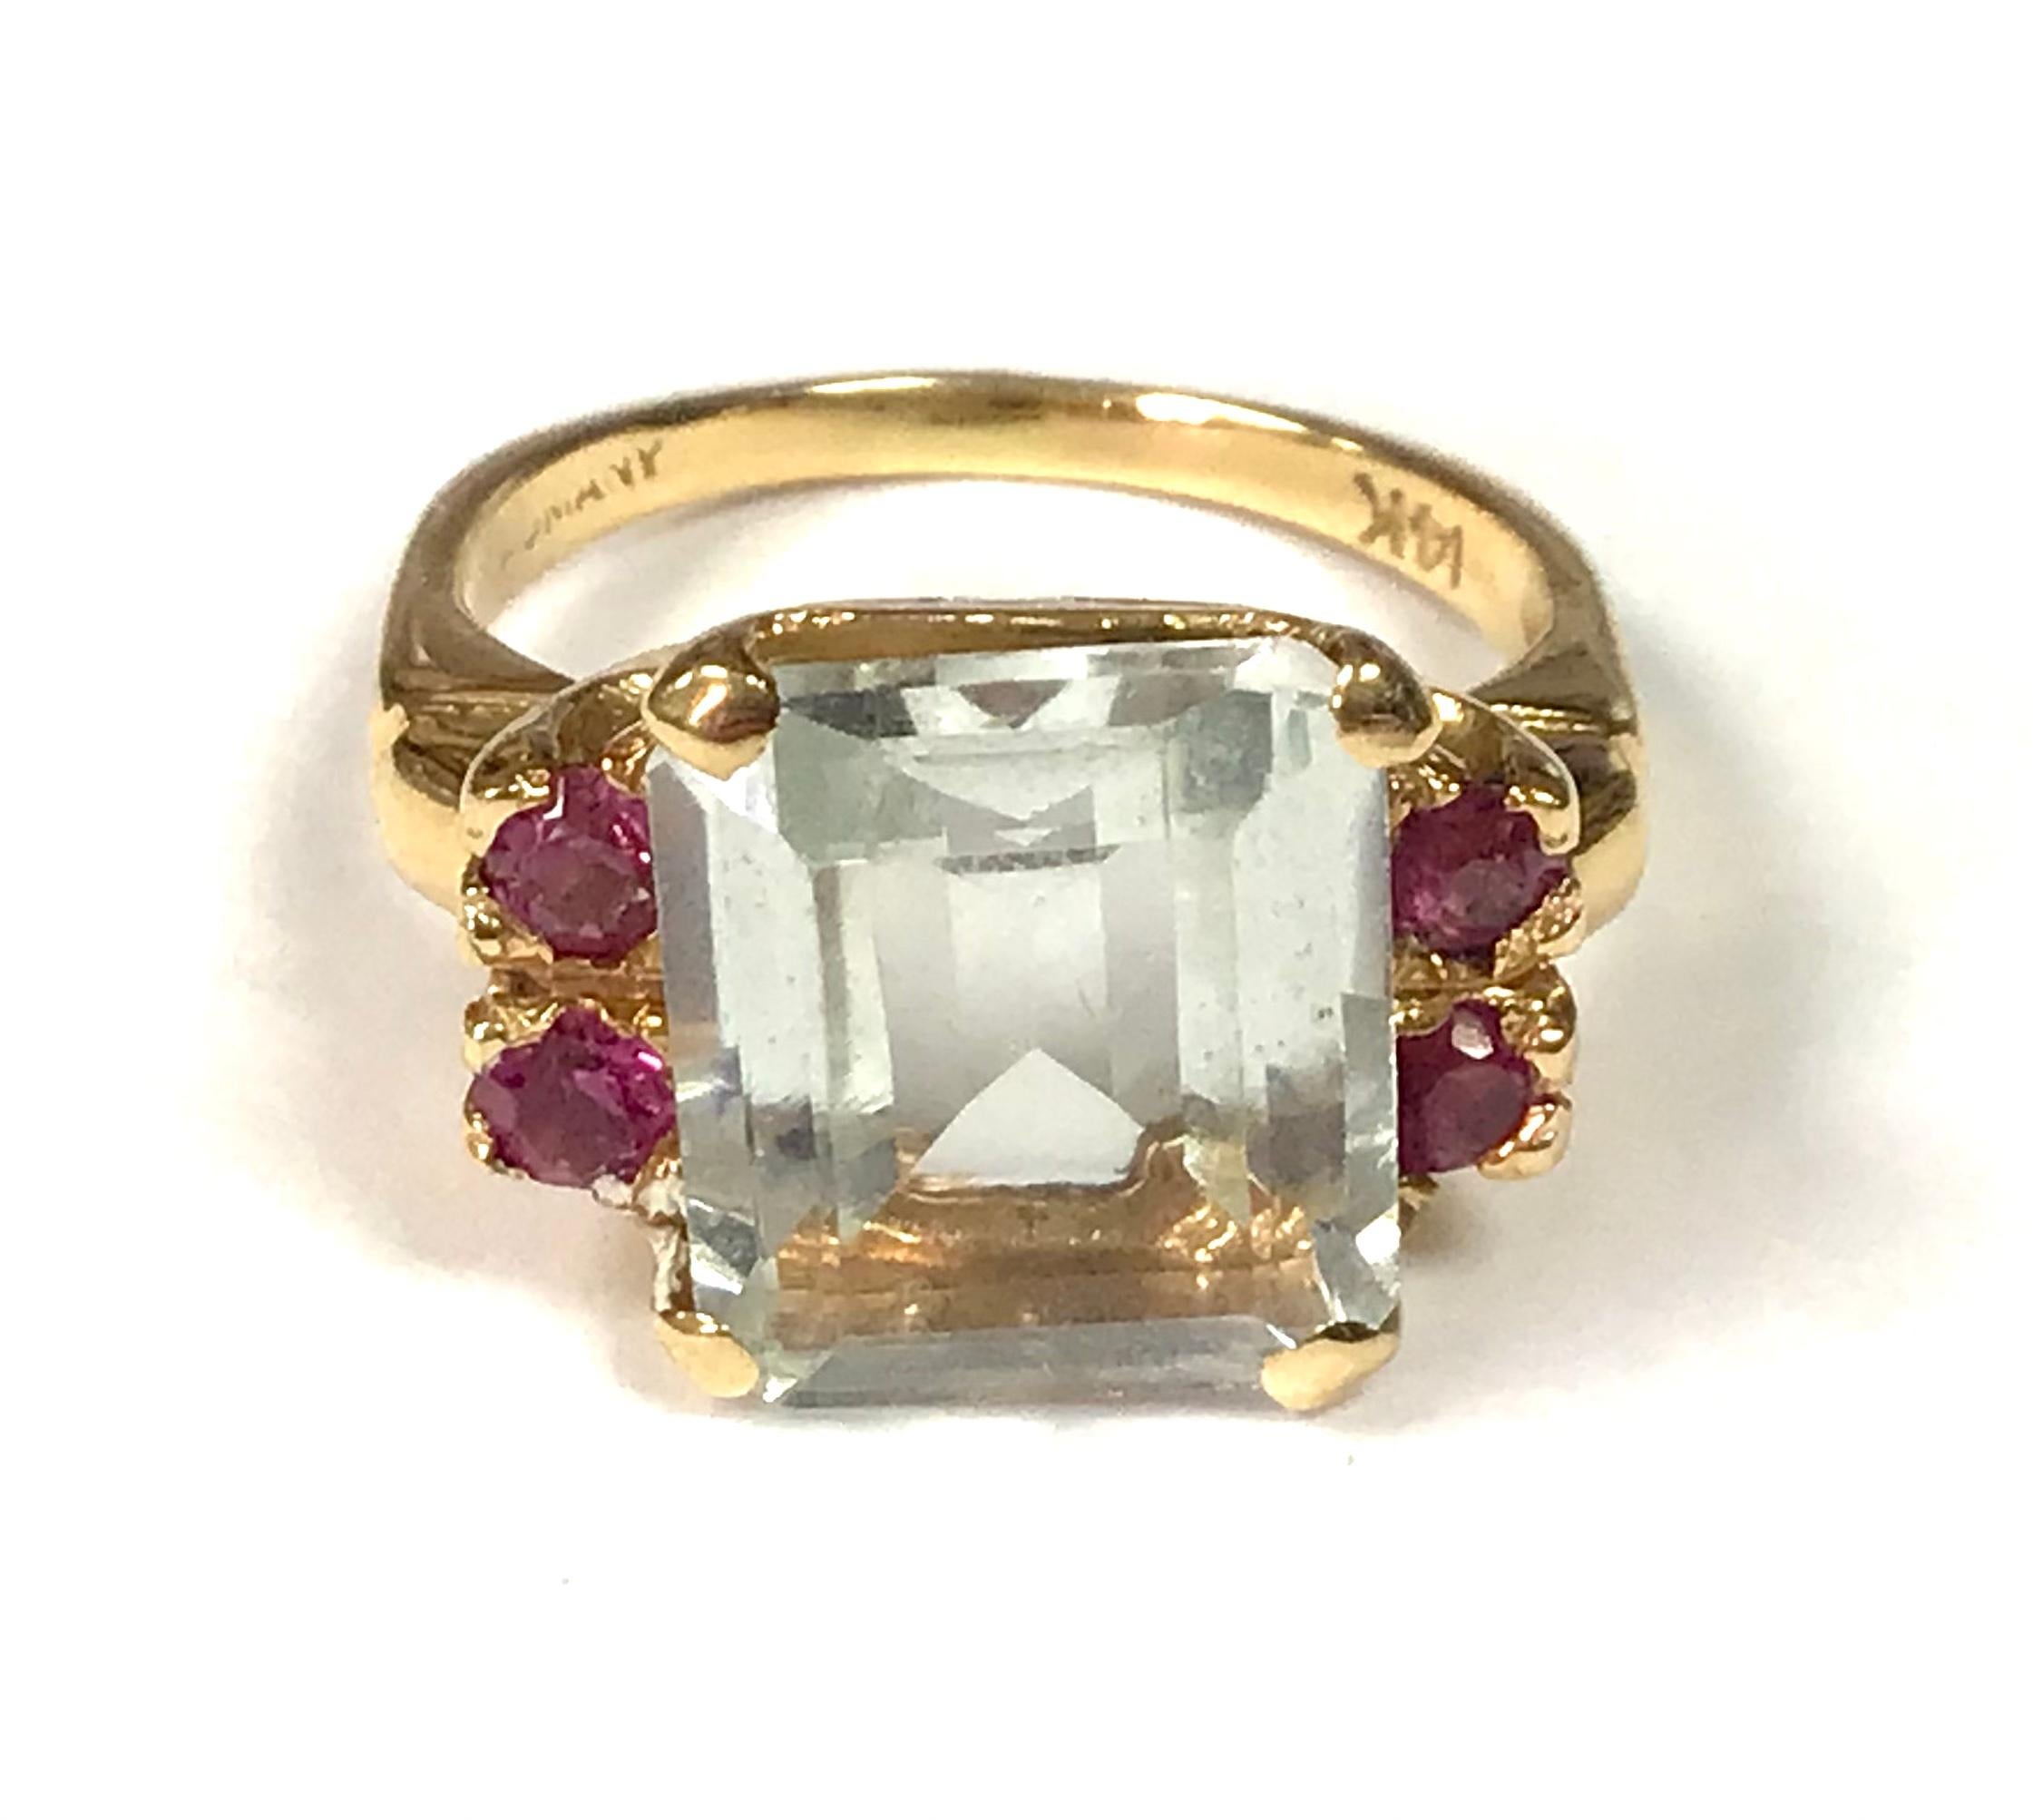 14K Yellow Gold, Aquamarine And Ruby Ring. Emerald cut aquamarine centered by four matching round pink rubies. Aquamarine approximately 5 carats. 